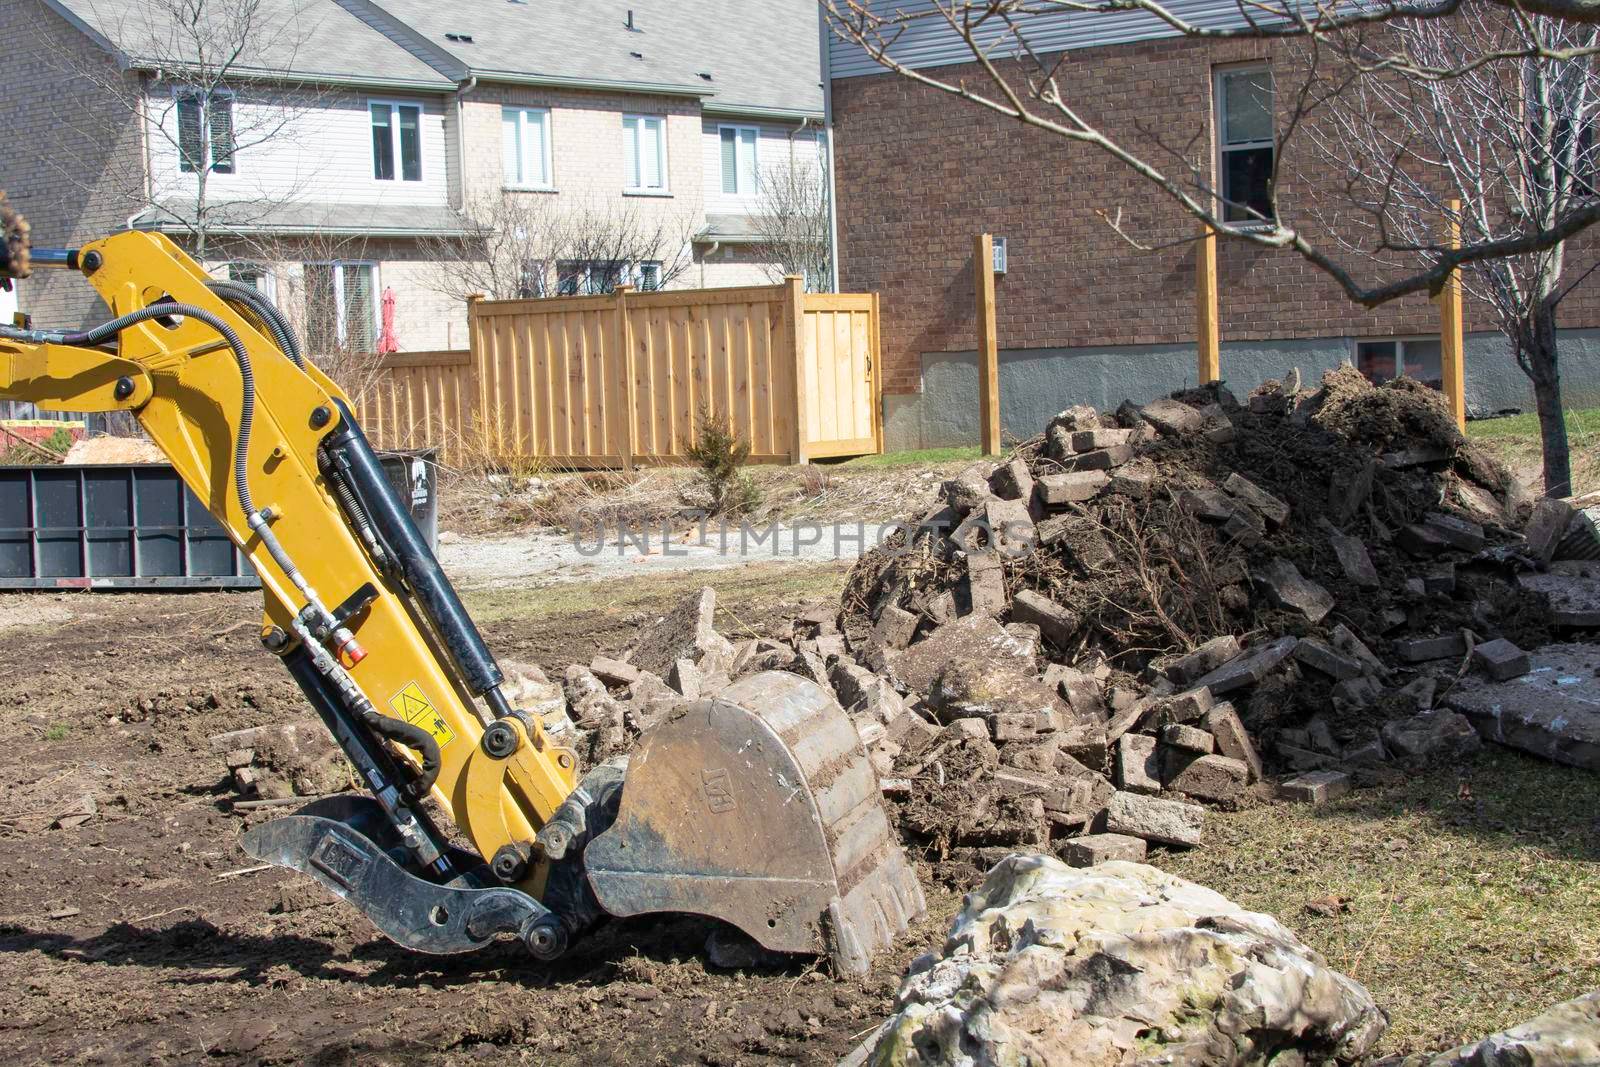 An excavator clears a site from debris and stones at a construction site for the construction of a cottage